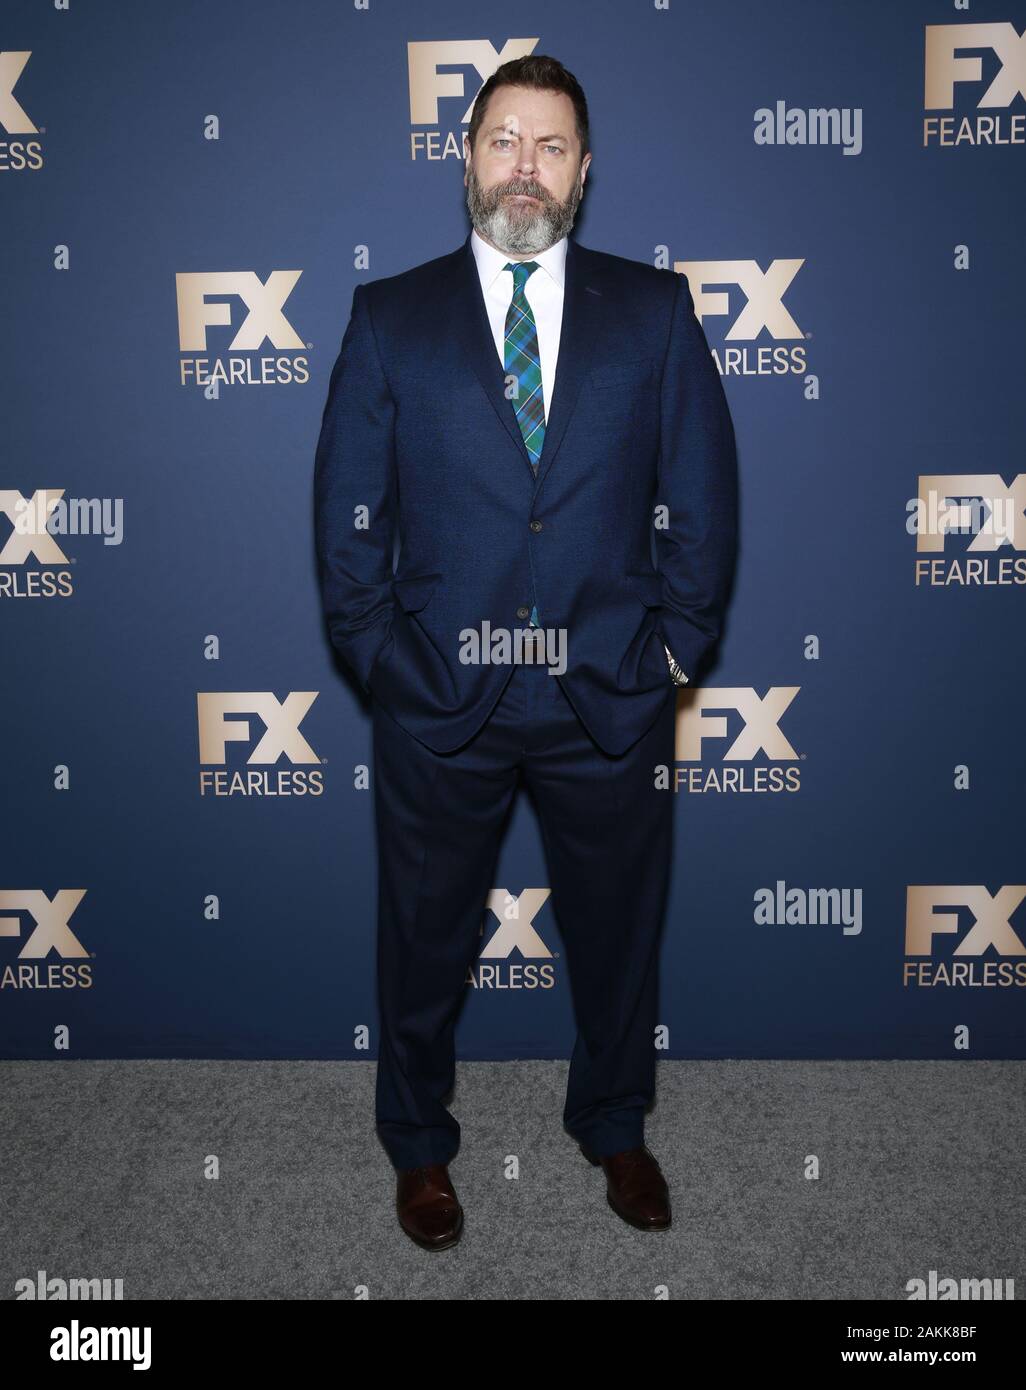 Pasadena, CA - January 09, 2020: Nick Offerman attends the FX Networks' Star Walk Winter Press Tour 2020 at The Langham Huntington Stock Photo